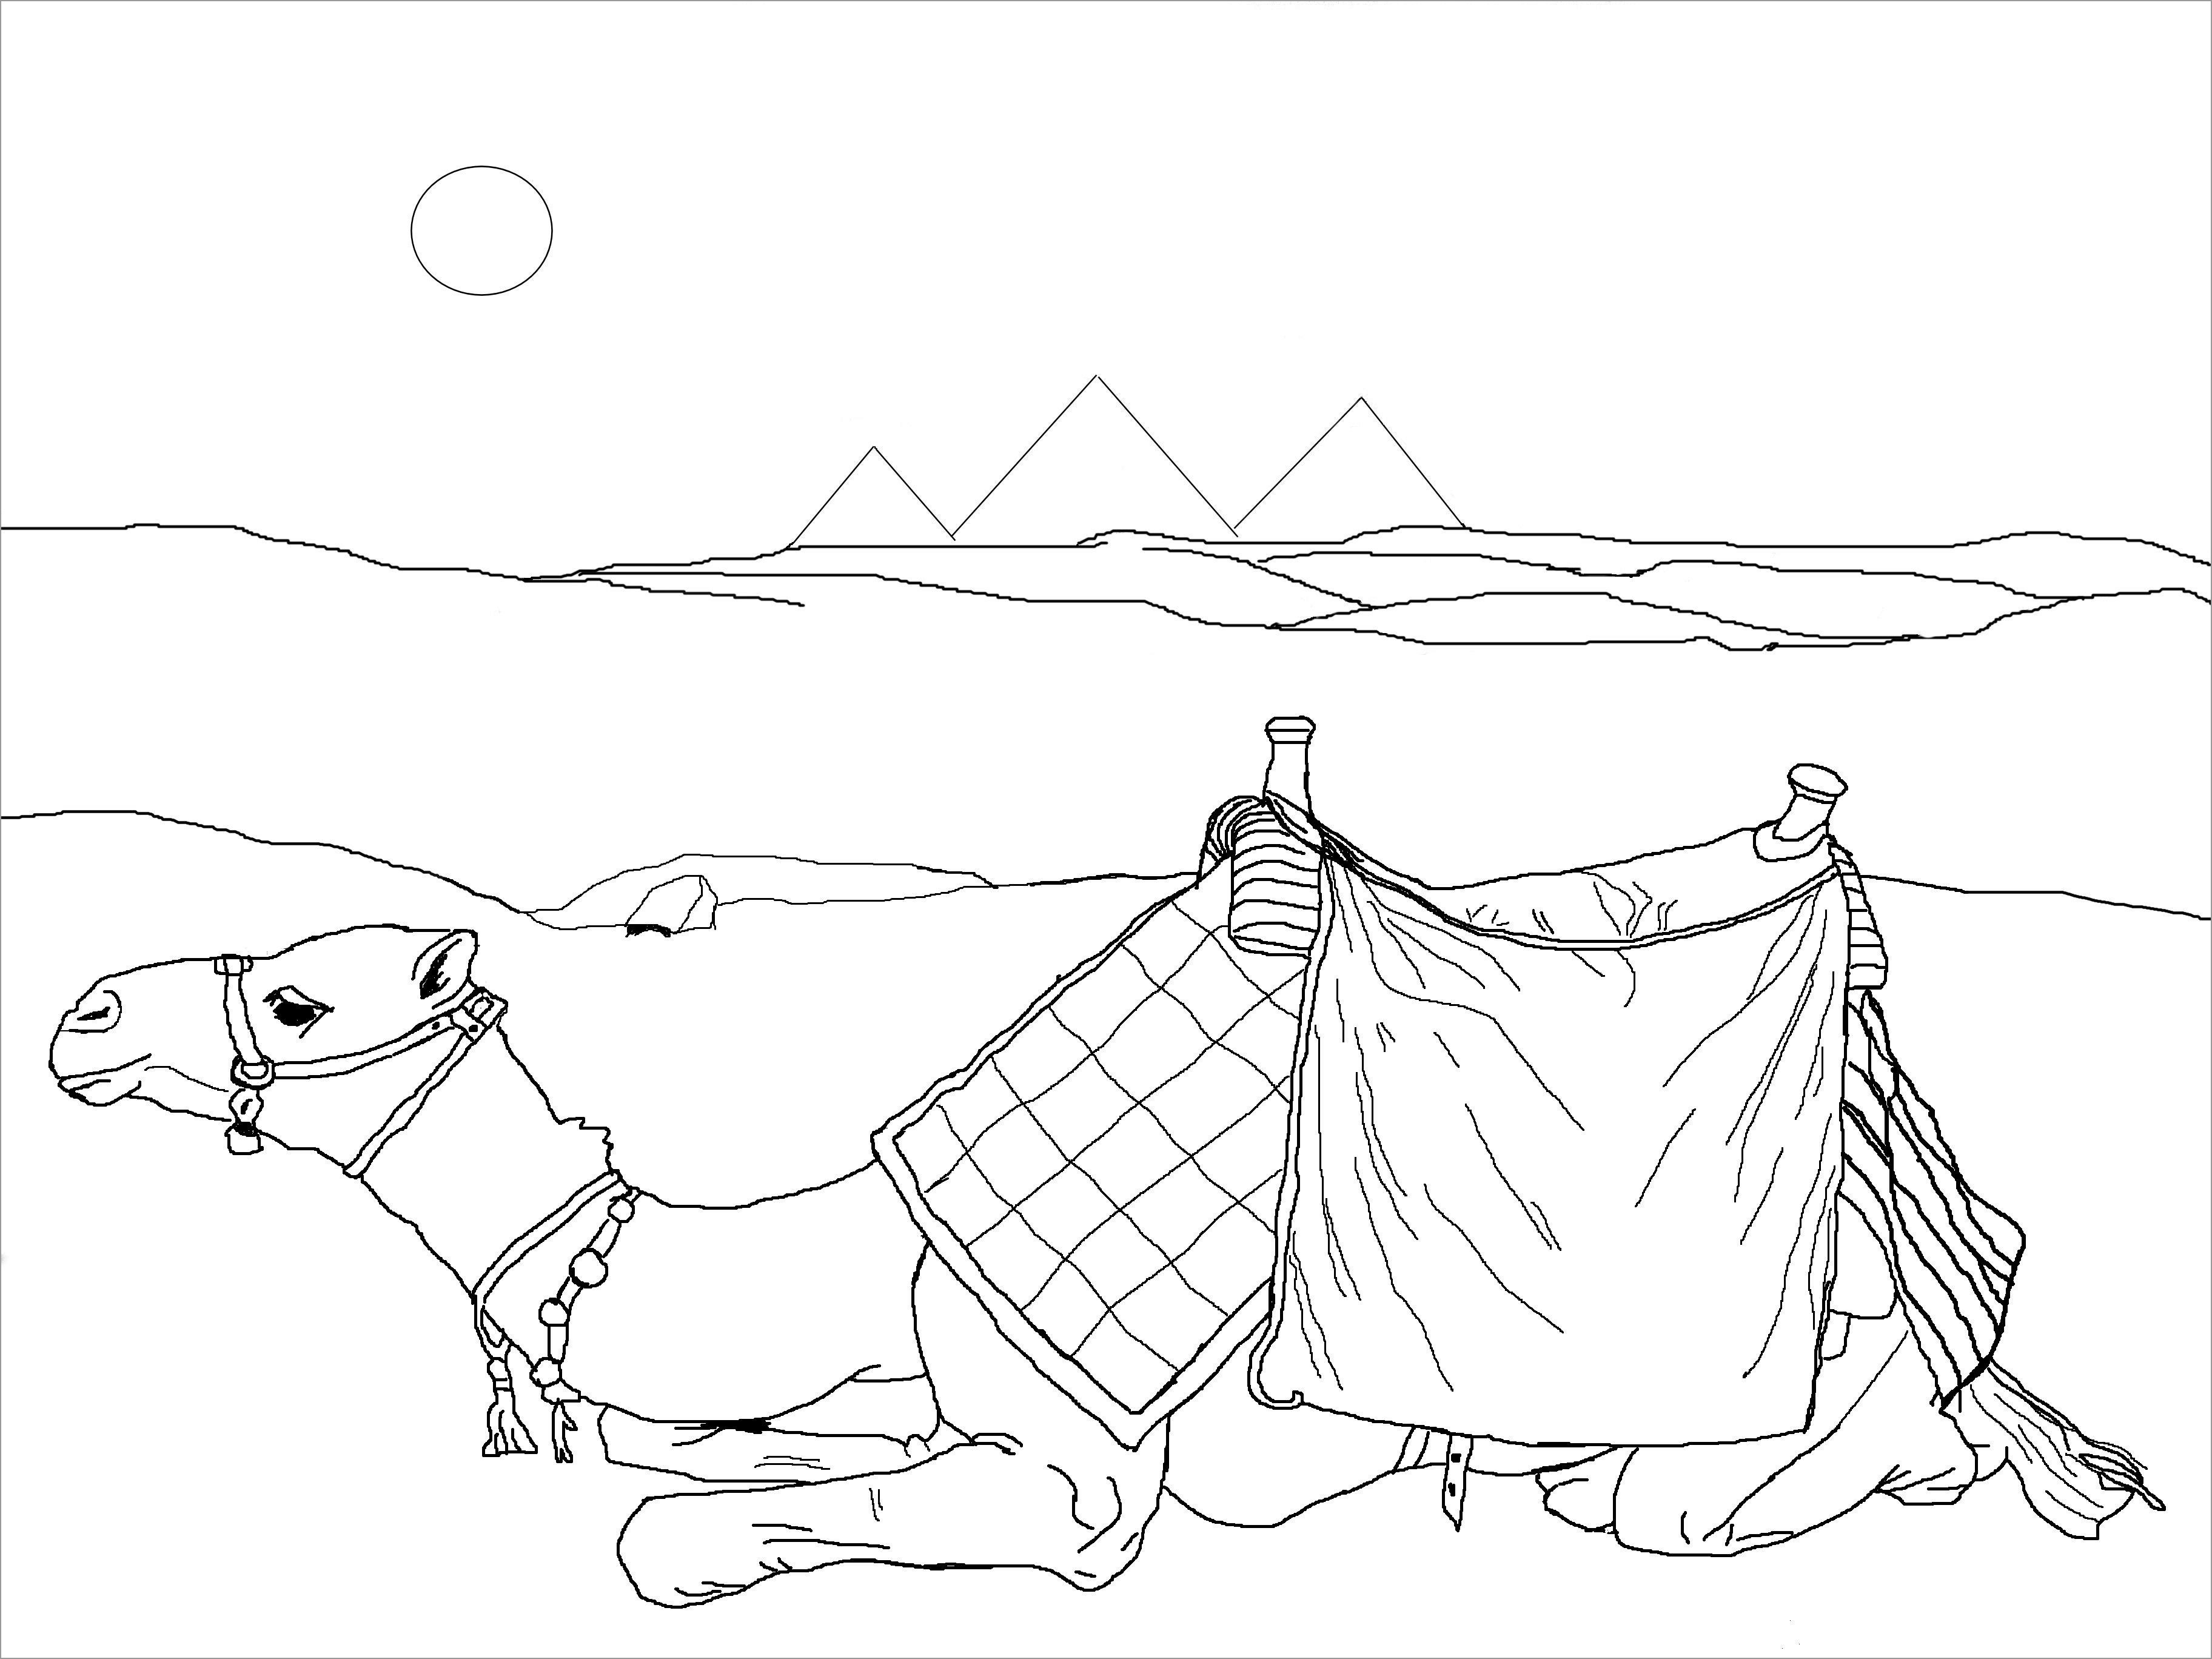 Camel Lying Down Coloring Pages